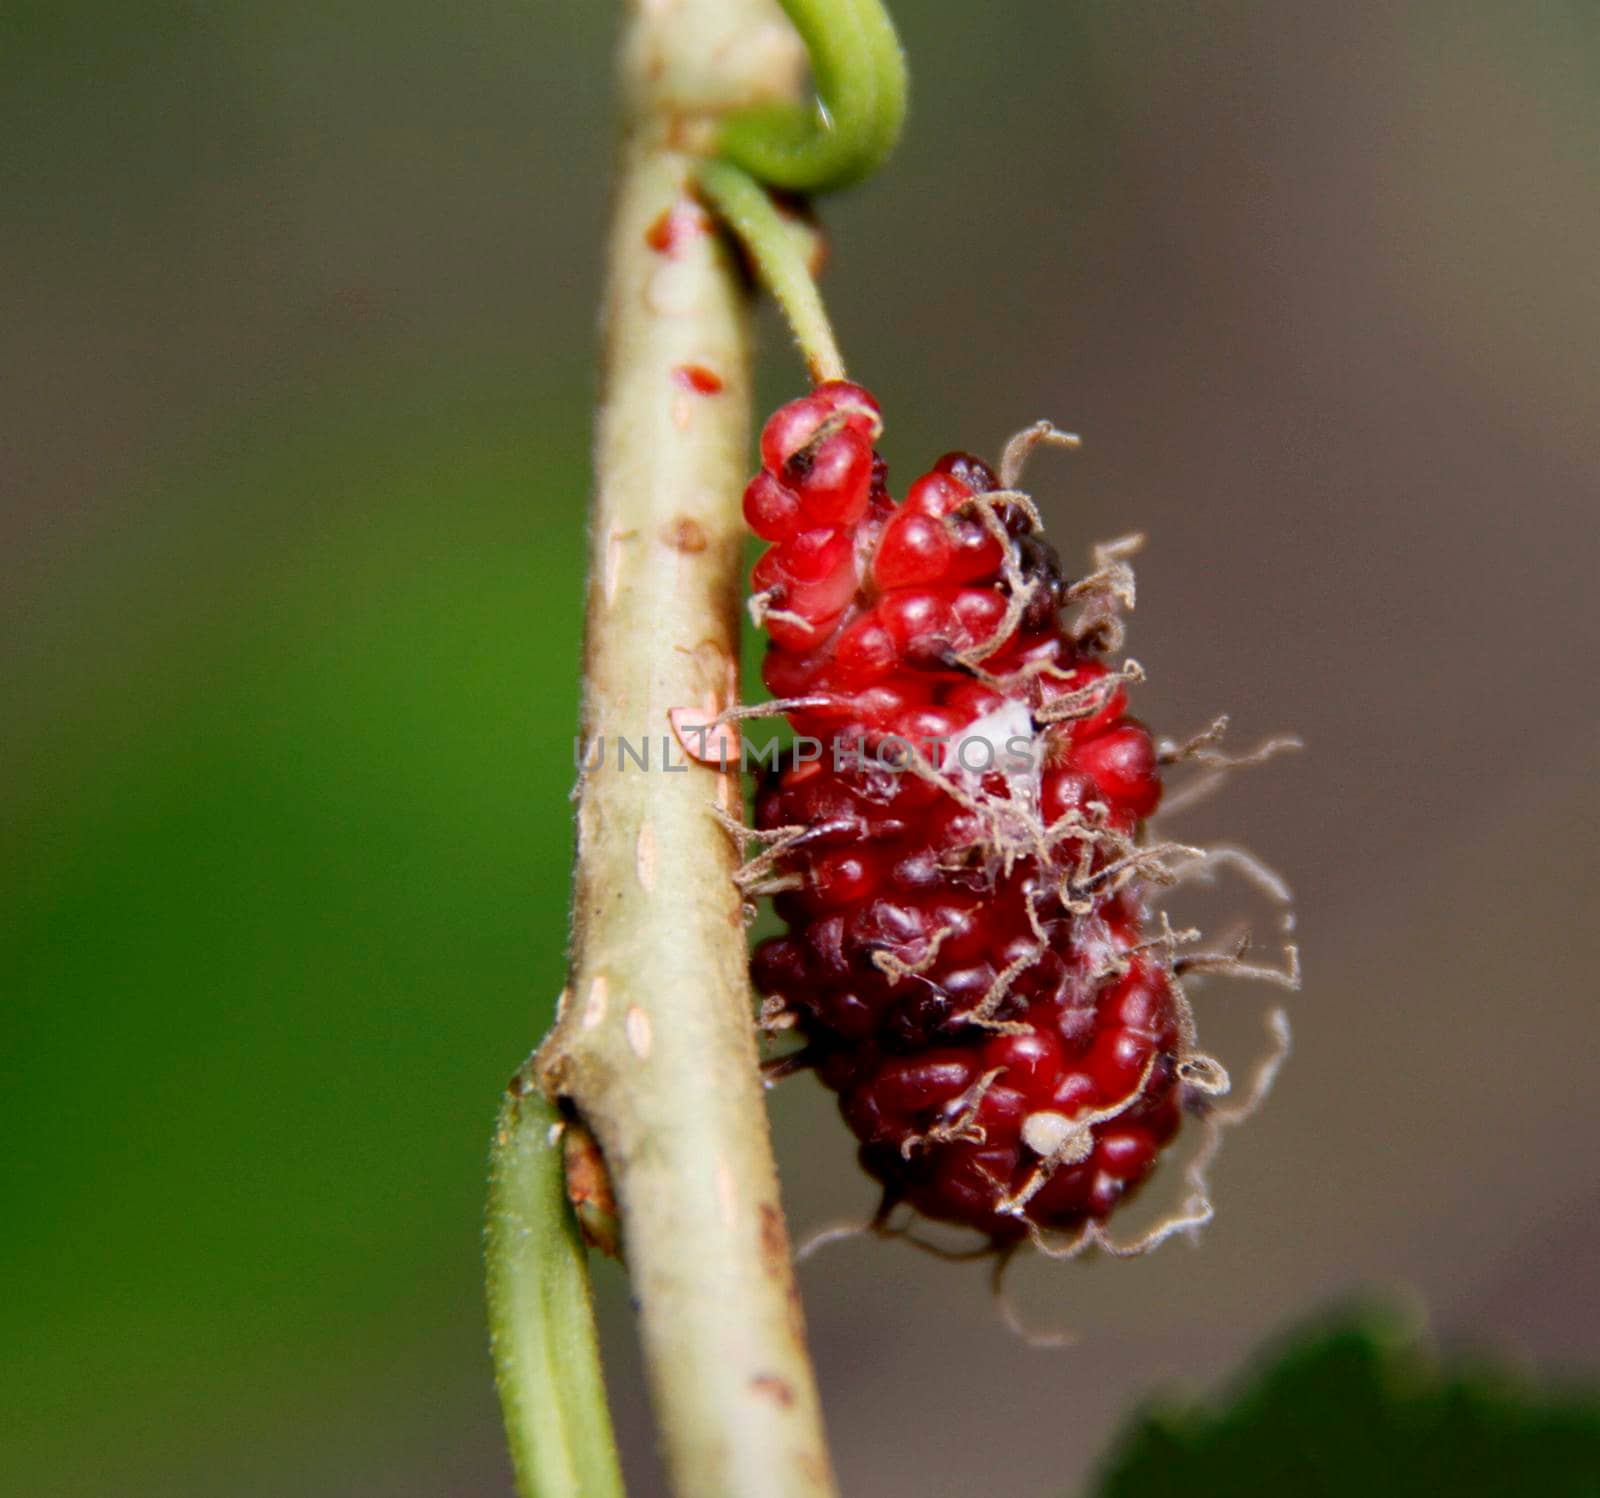 salvador, bahia / brazil - july 26, 2014: blackberry fruit is seen on a plant in the city of Salvador.


